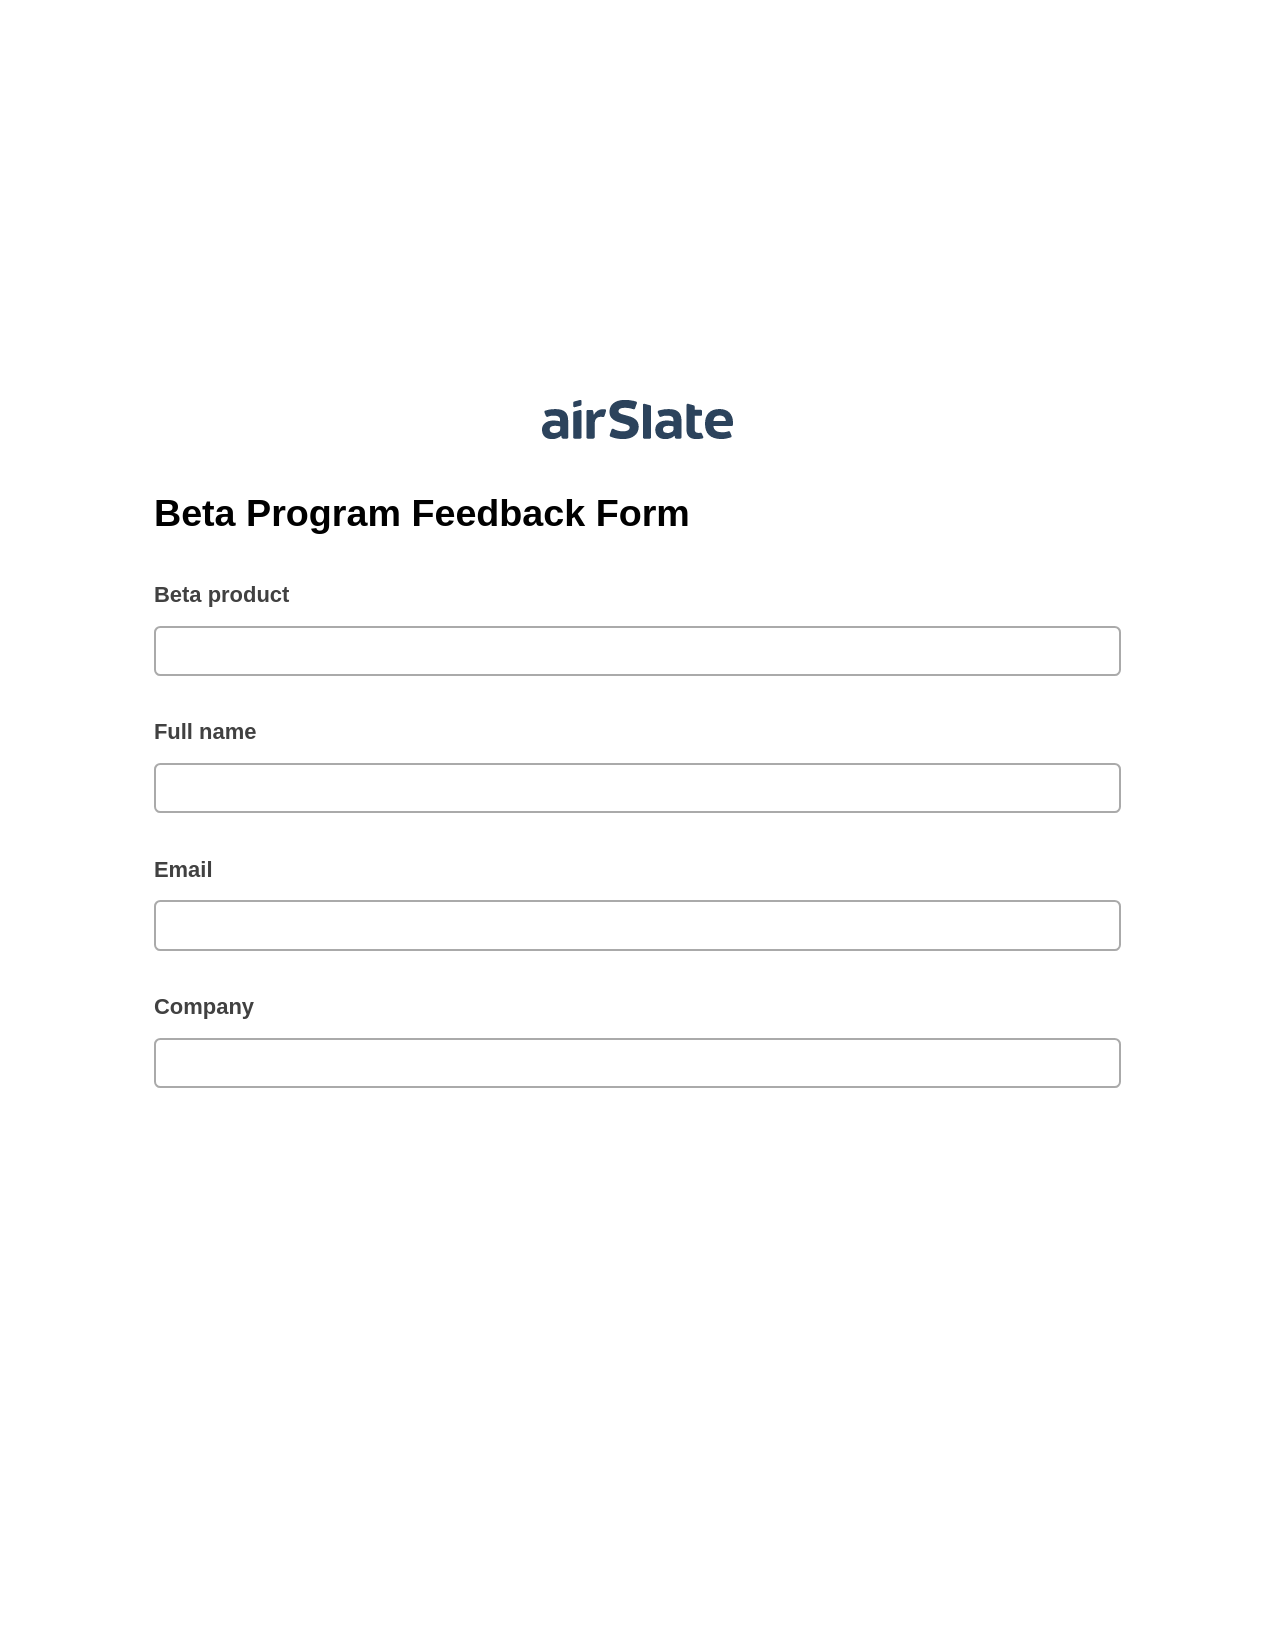 Multirole Beta Program Feedback Form Pre-fill from Google Sheets Bot, Send a Slate with Roles Bot, Archive to SharePoint Folder Bot